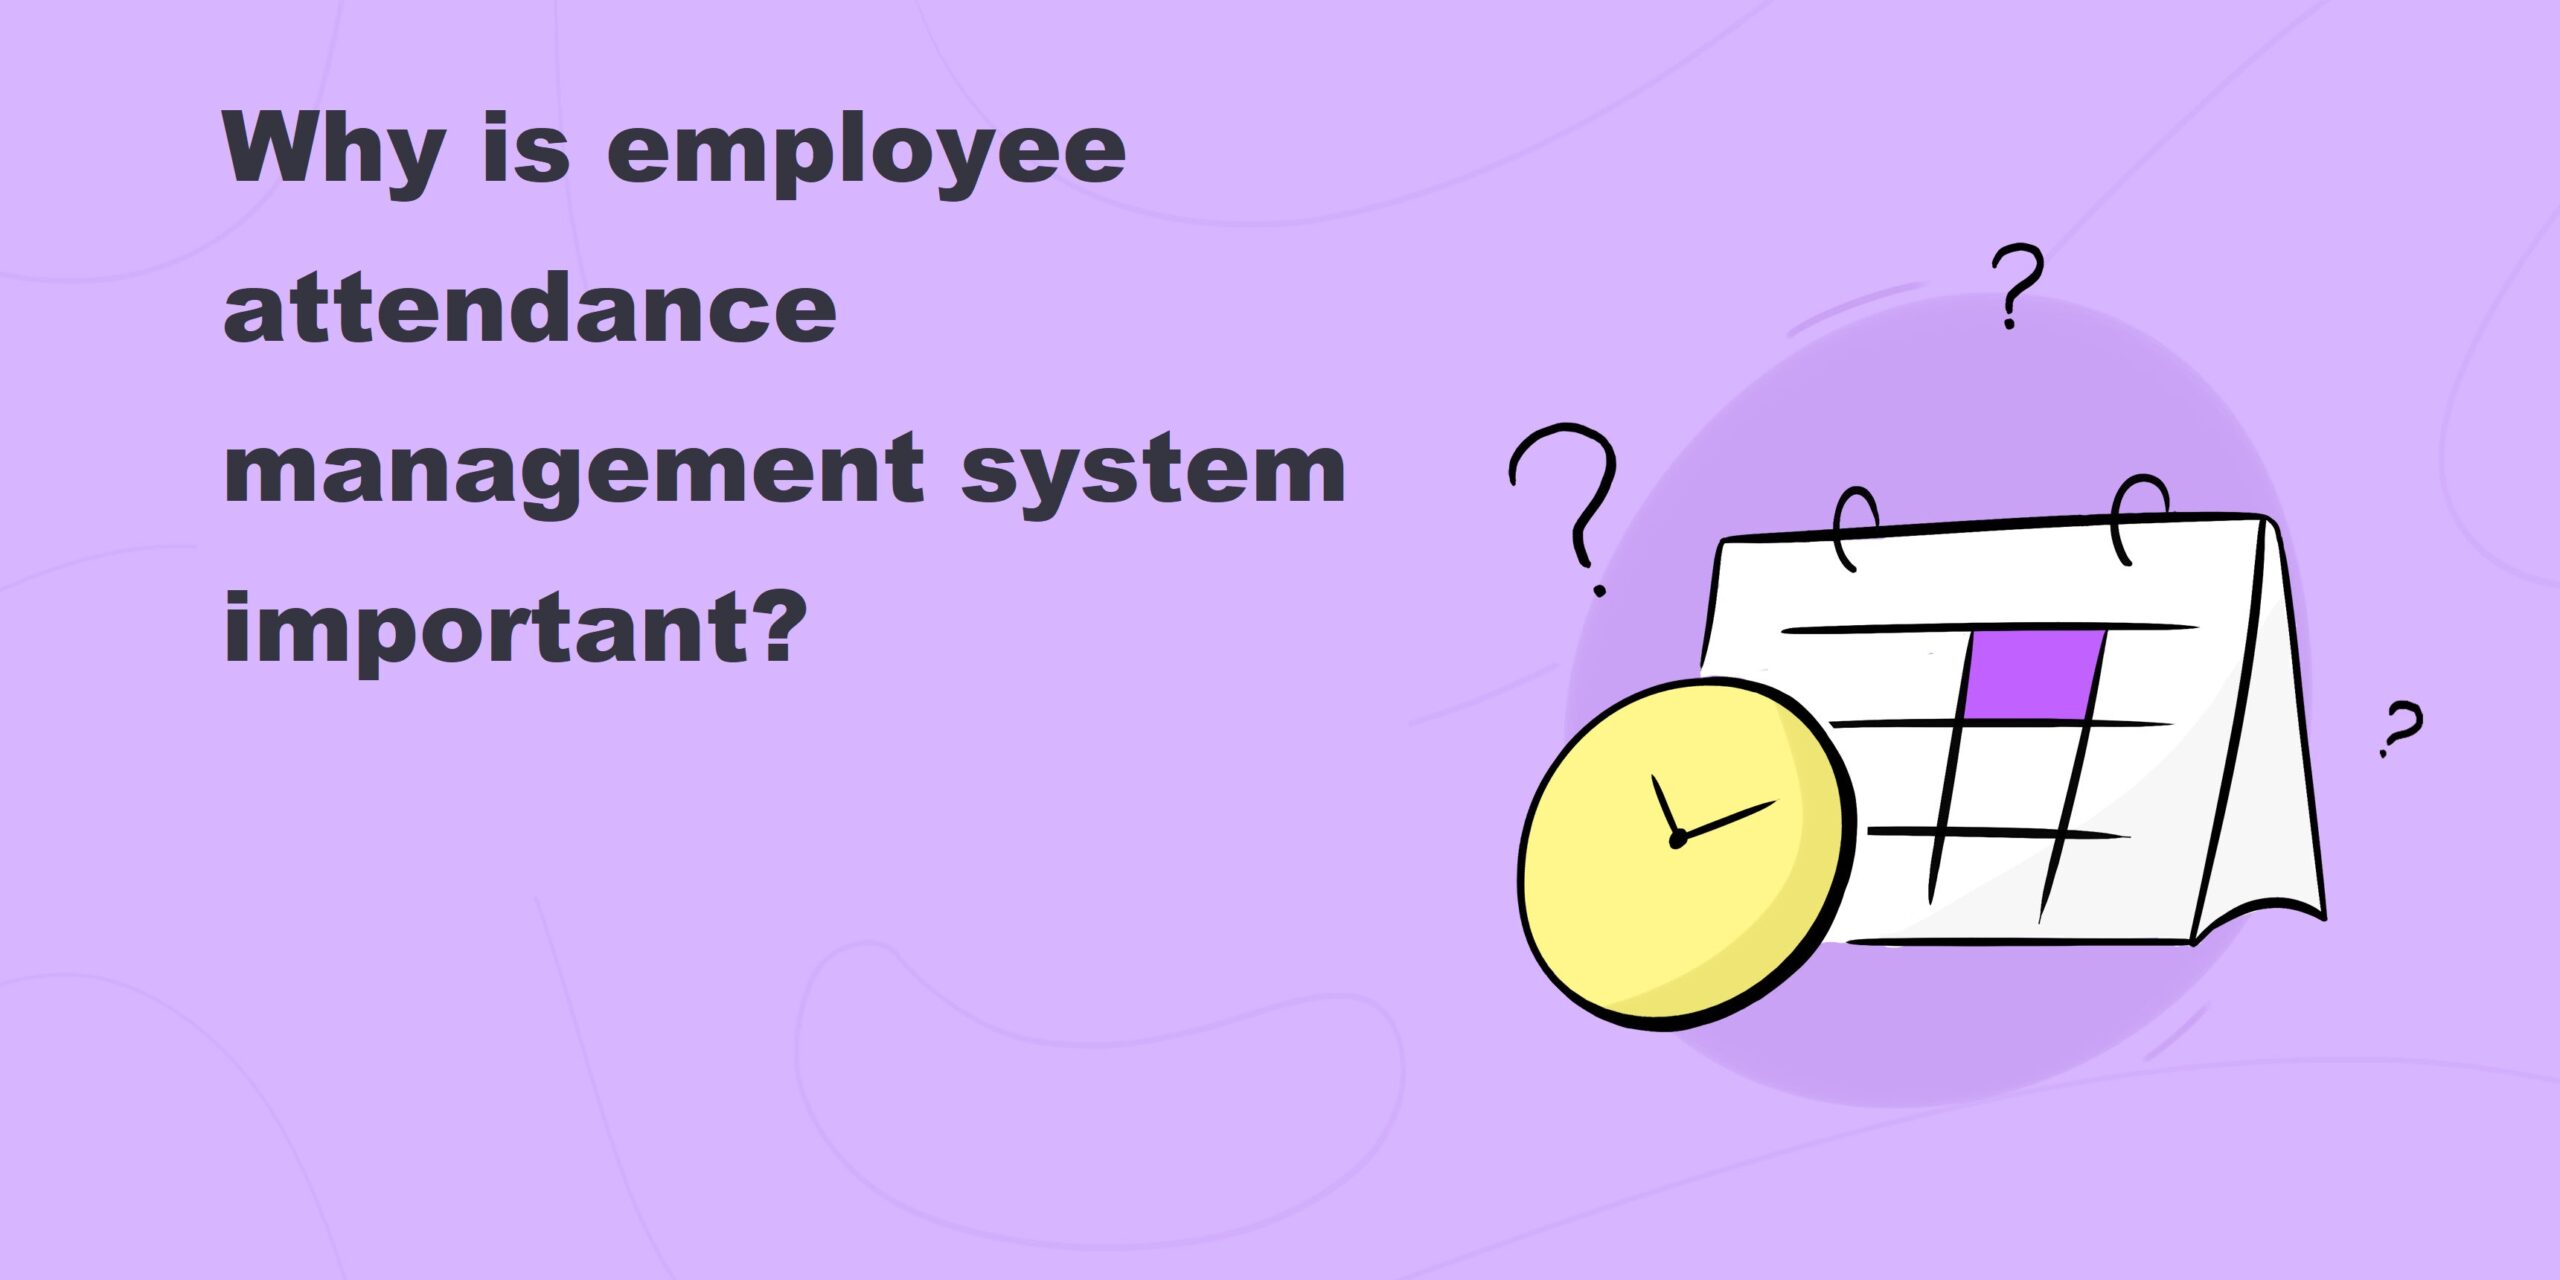 Why is employee attendance management system important?